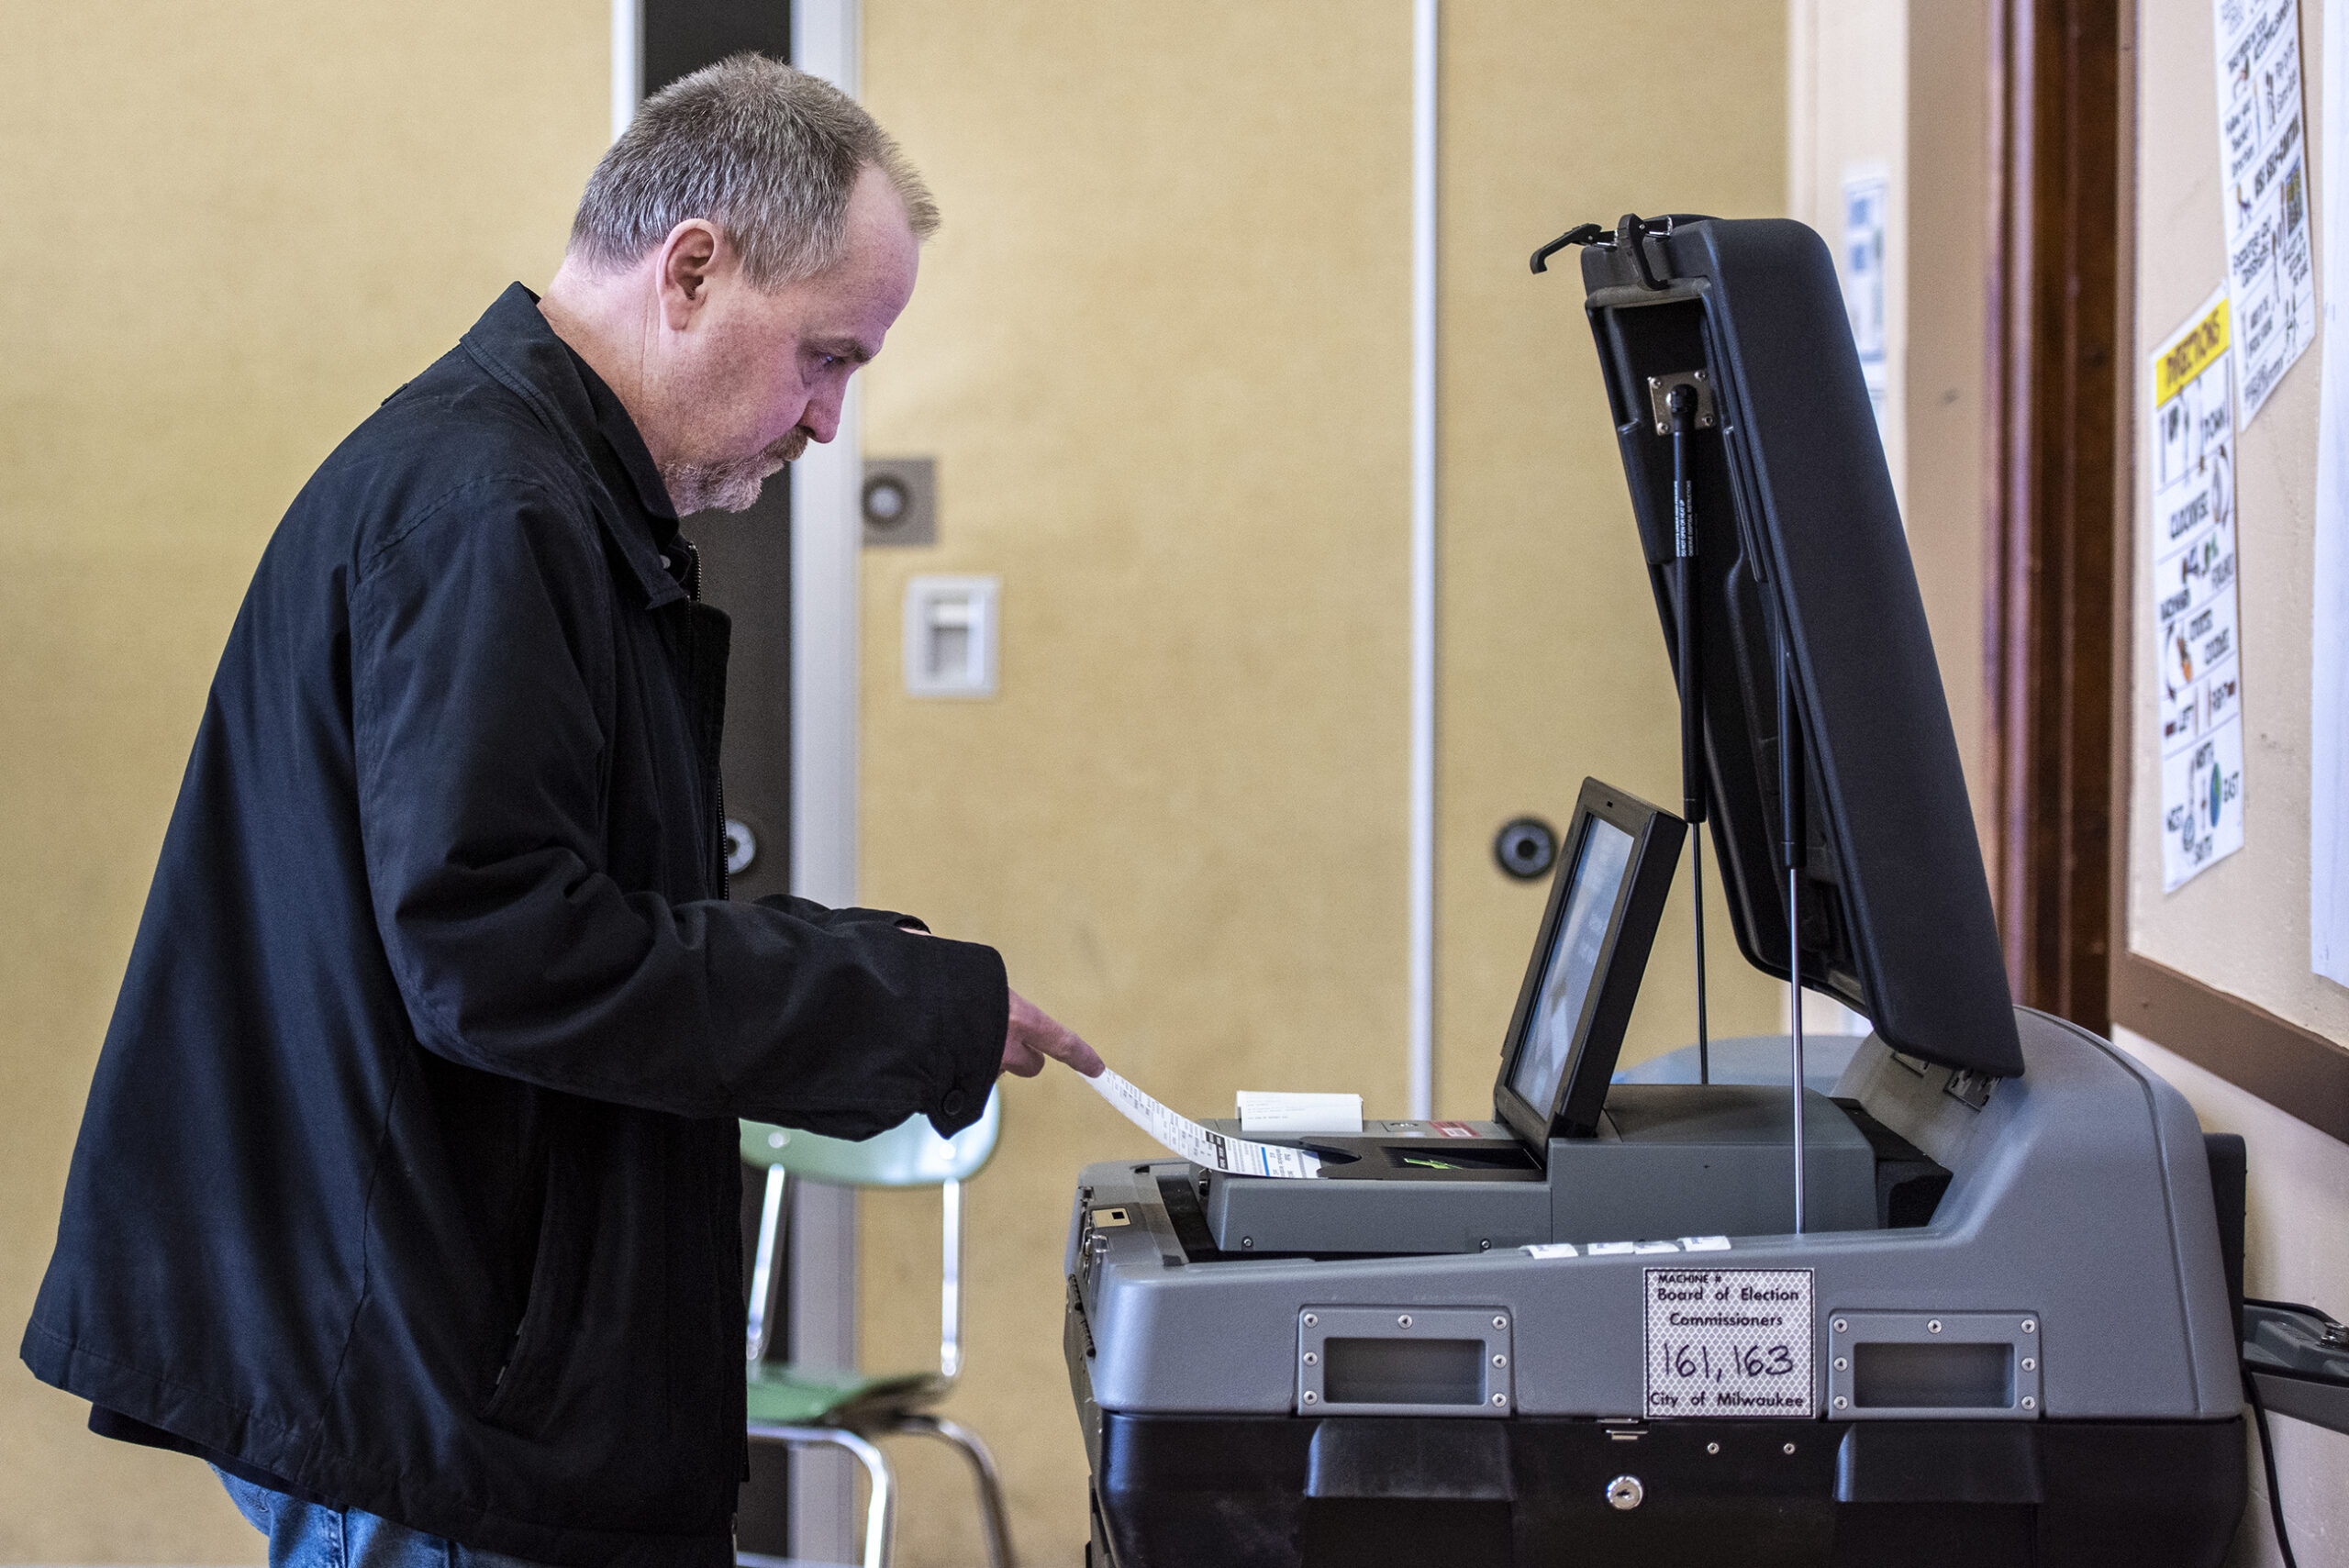 A voter puts his ballot into a machine at a polling location.